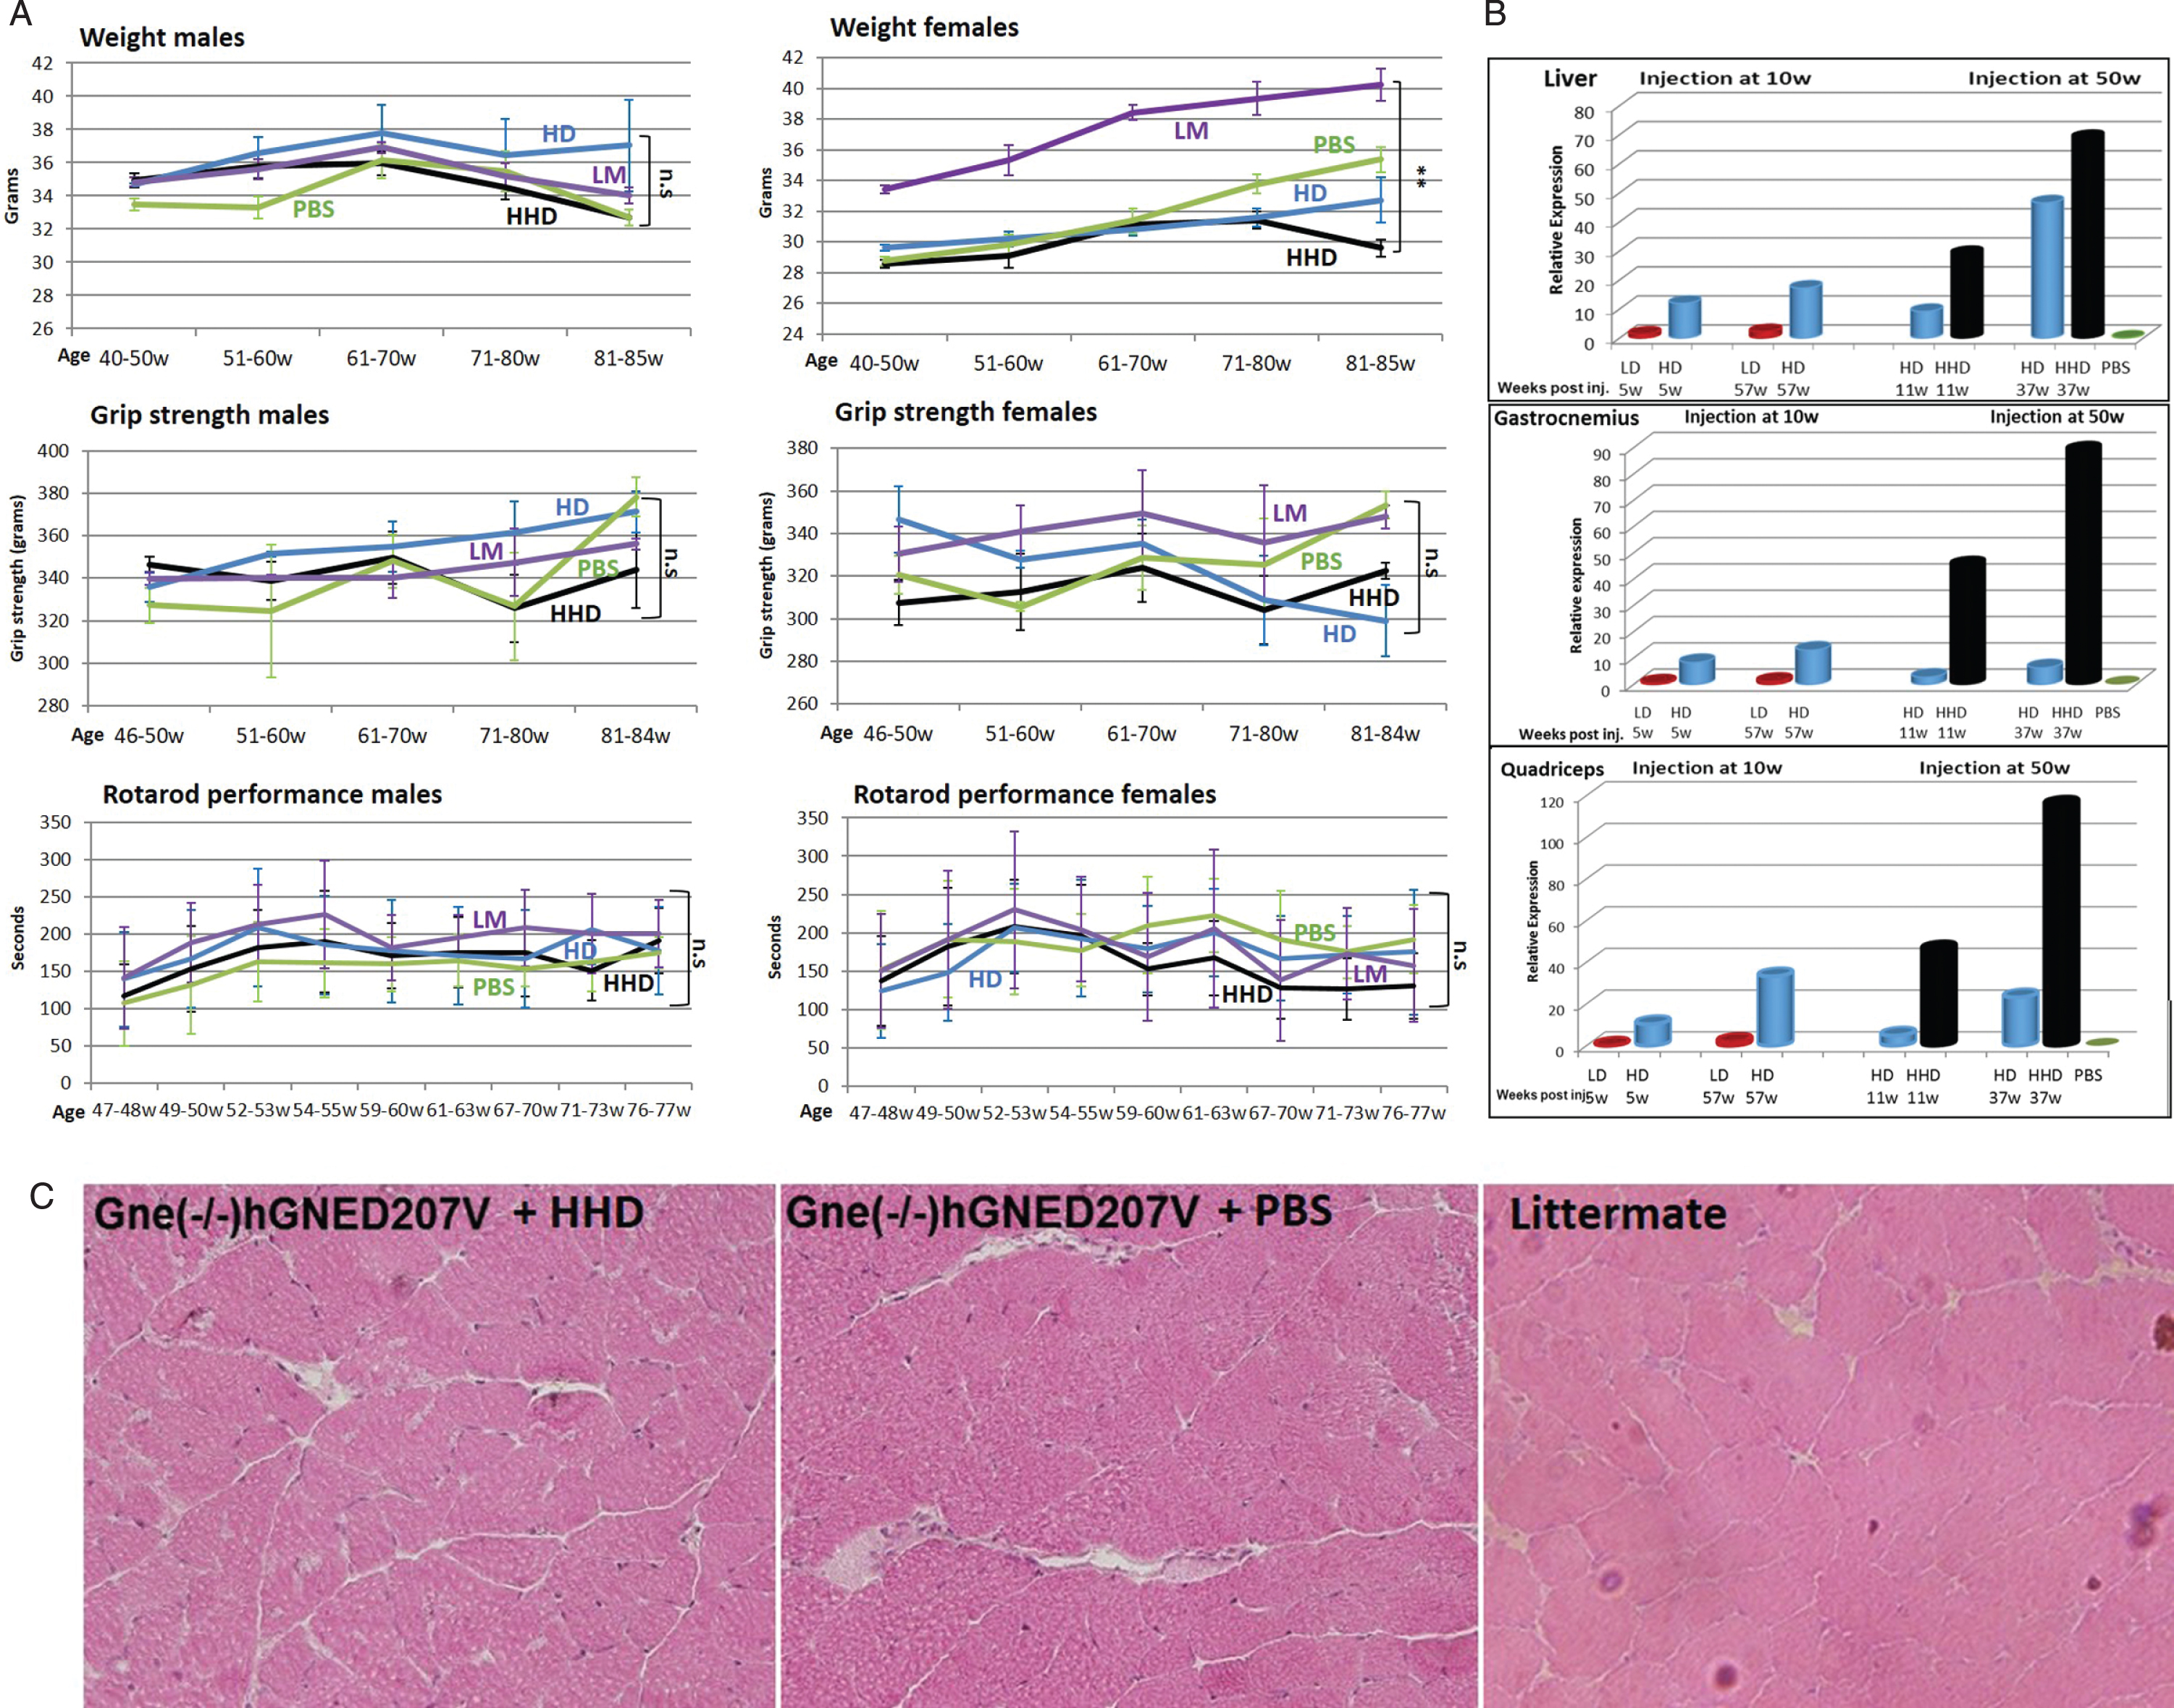 Functional efficacy of gene therapy and GNE expression in Gne(–/–) hGNED207V-Tg 50 week old treated mice. Weight, grip force and rotarod performance follow up of Gne(–/–) hGNED207V-Tg mice after systemic delivery of high dose (HD-1.1014 vg/kg) and higher dose (HHD-5.1014 vg/kg) of rAAVrh74MCKGNE viral vector to 50 week old mice; LM, littermate; PBS, Gne(–/–) hGNED207V-Tg mice injected with PBS. ** = p value < 0.01; ns = not significant. B. human wt GNE mRNA relative expression of the HD and HHD treated 50 week old Gne(–/–) hGNED207V-Tg mice (right panel), 11 and 37 weeks post injection, compared to the 10 week old injected mice (left panel); C. Representative H&E gastrocnemius histological section of a 50 week old treated Gne(–/–) hGNED207V-Tg mouse, 37 weeks after injection of an HHD dose of rAAVrh74MC.GNE viral vector.